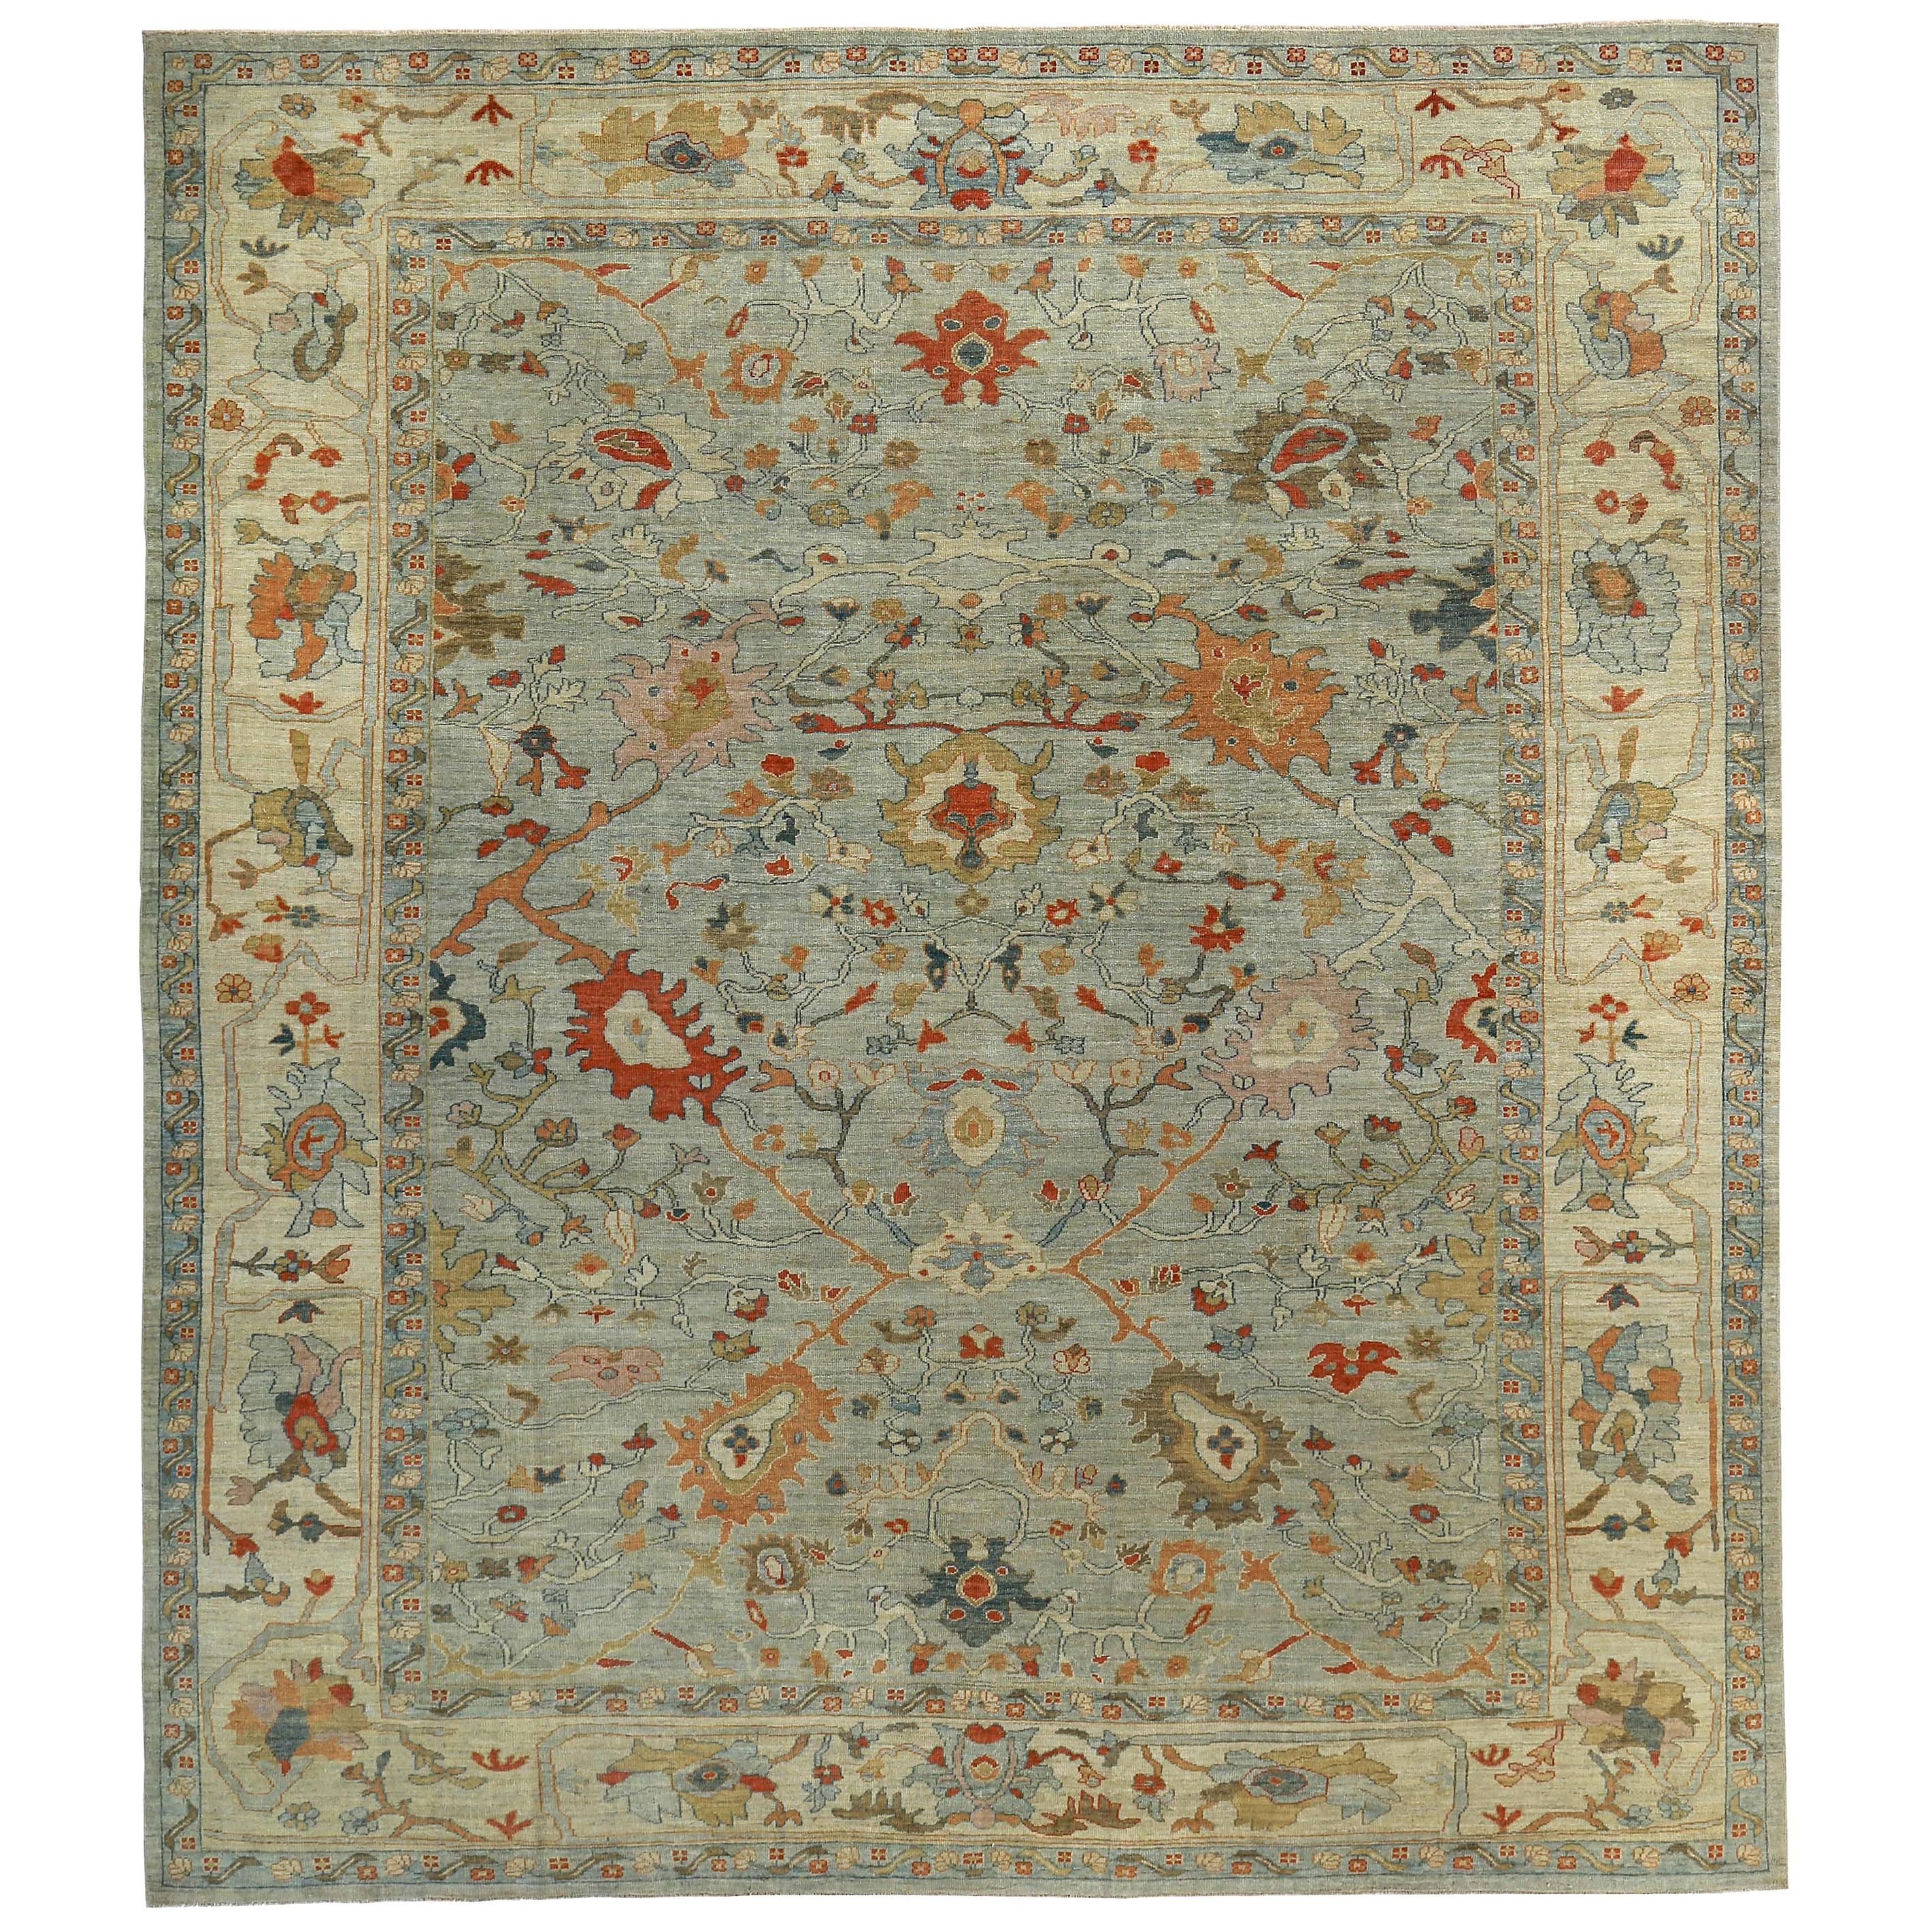 Turkish Rug Sultanabad Style with Rust, Orange and Blue Botanical Details